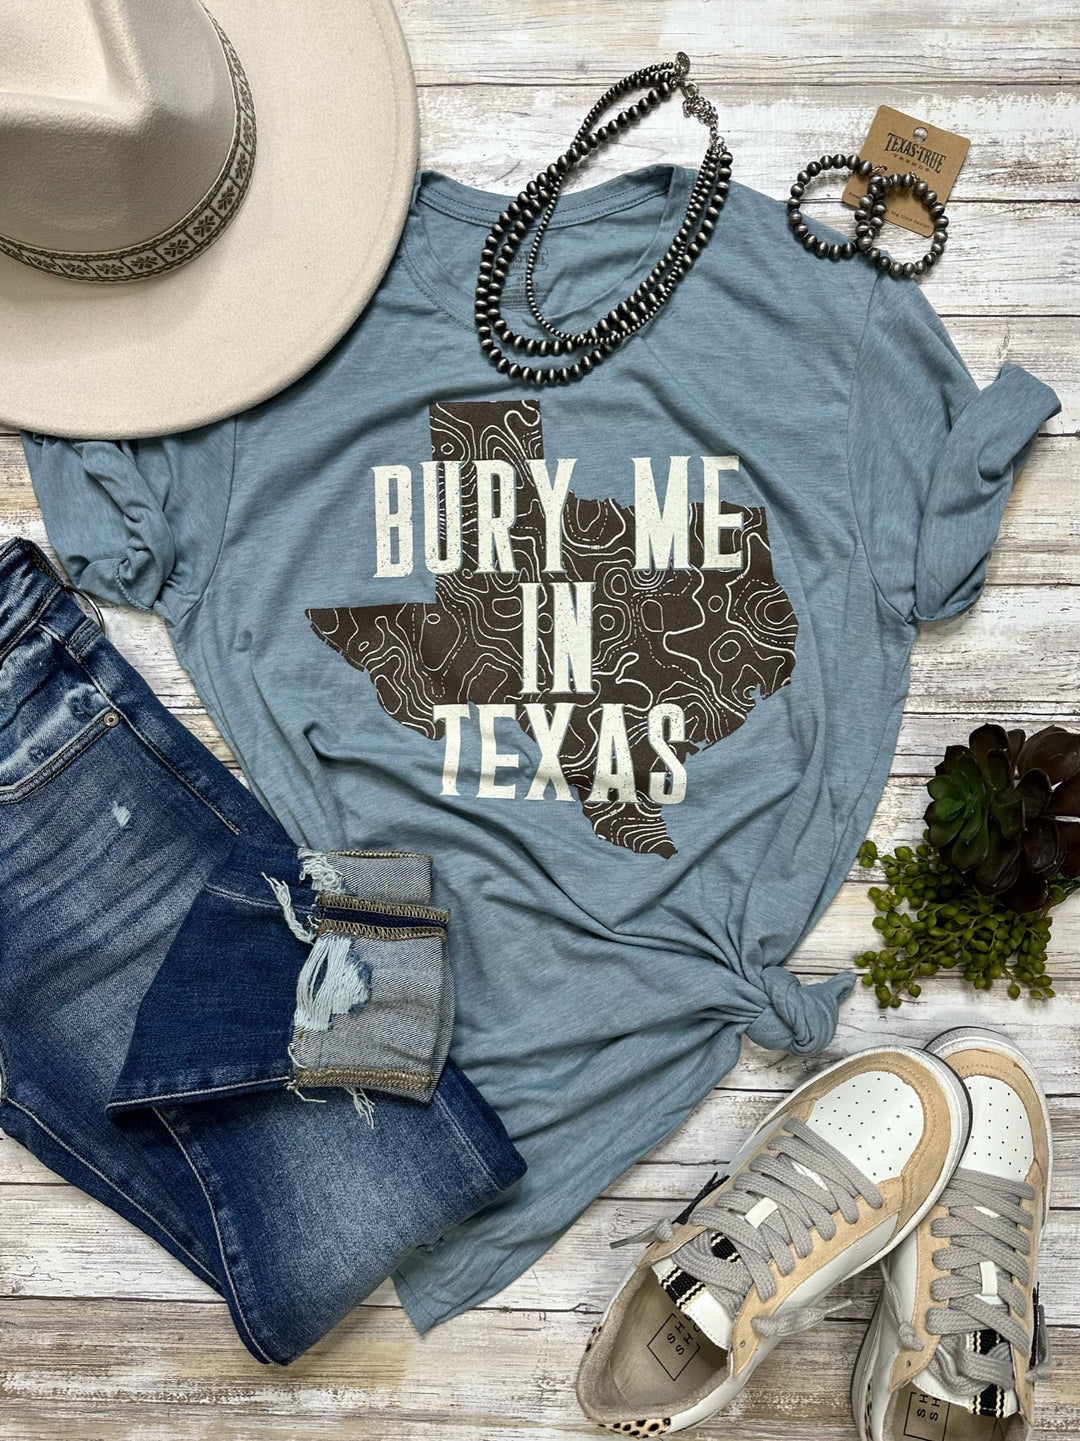 Bury Me in Texas Graphic Tee by Texas True Threads